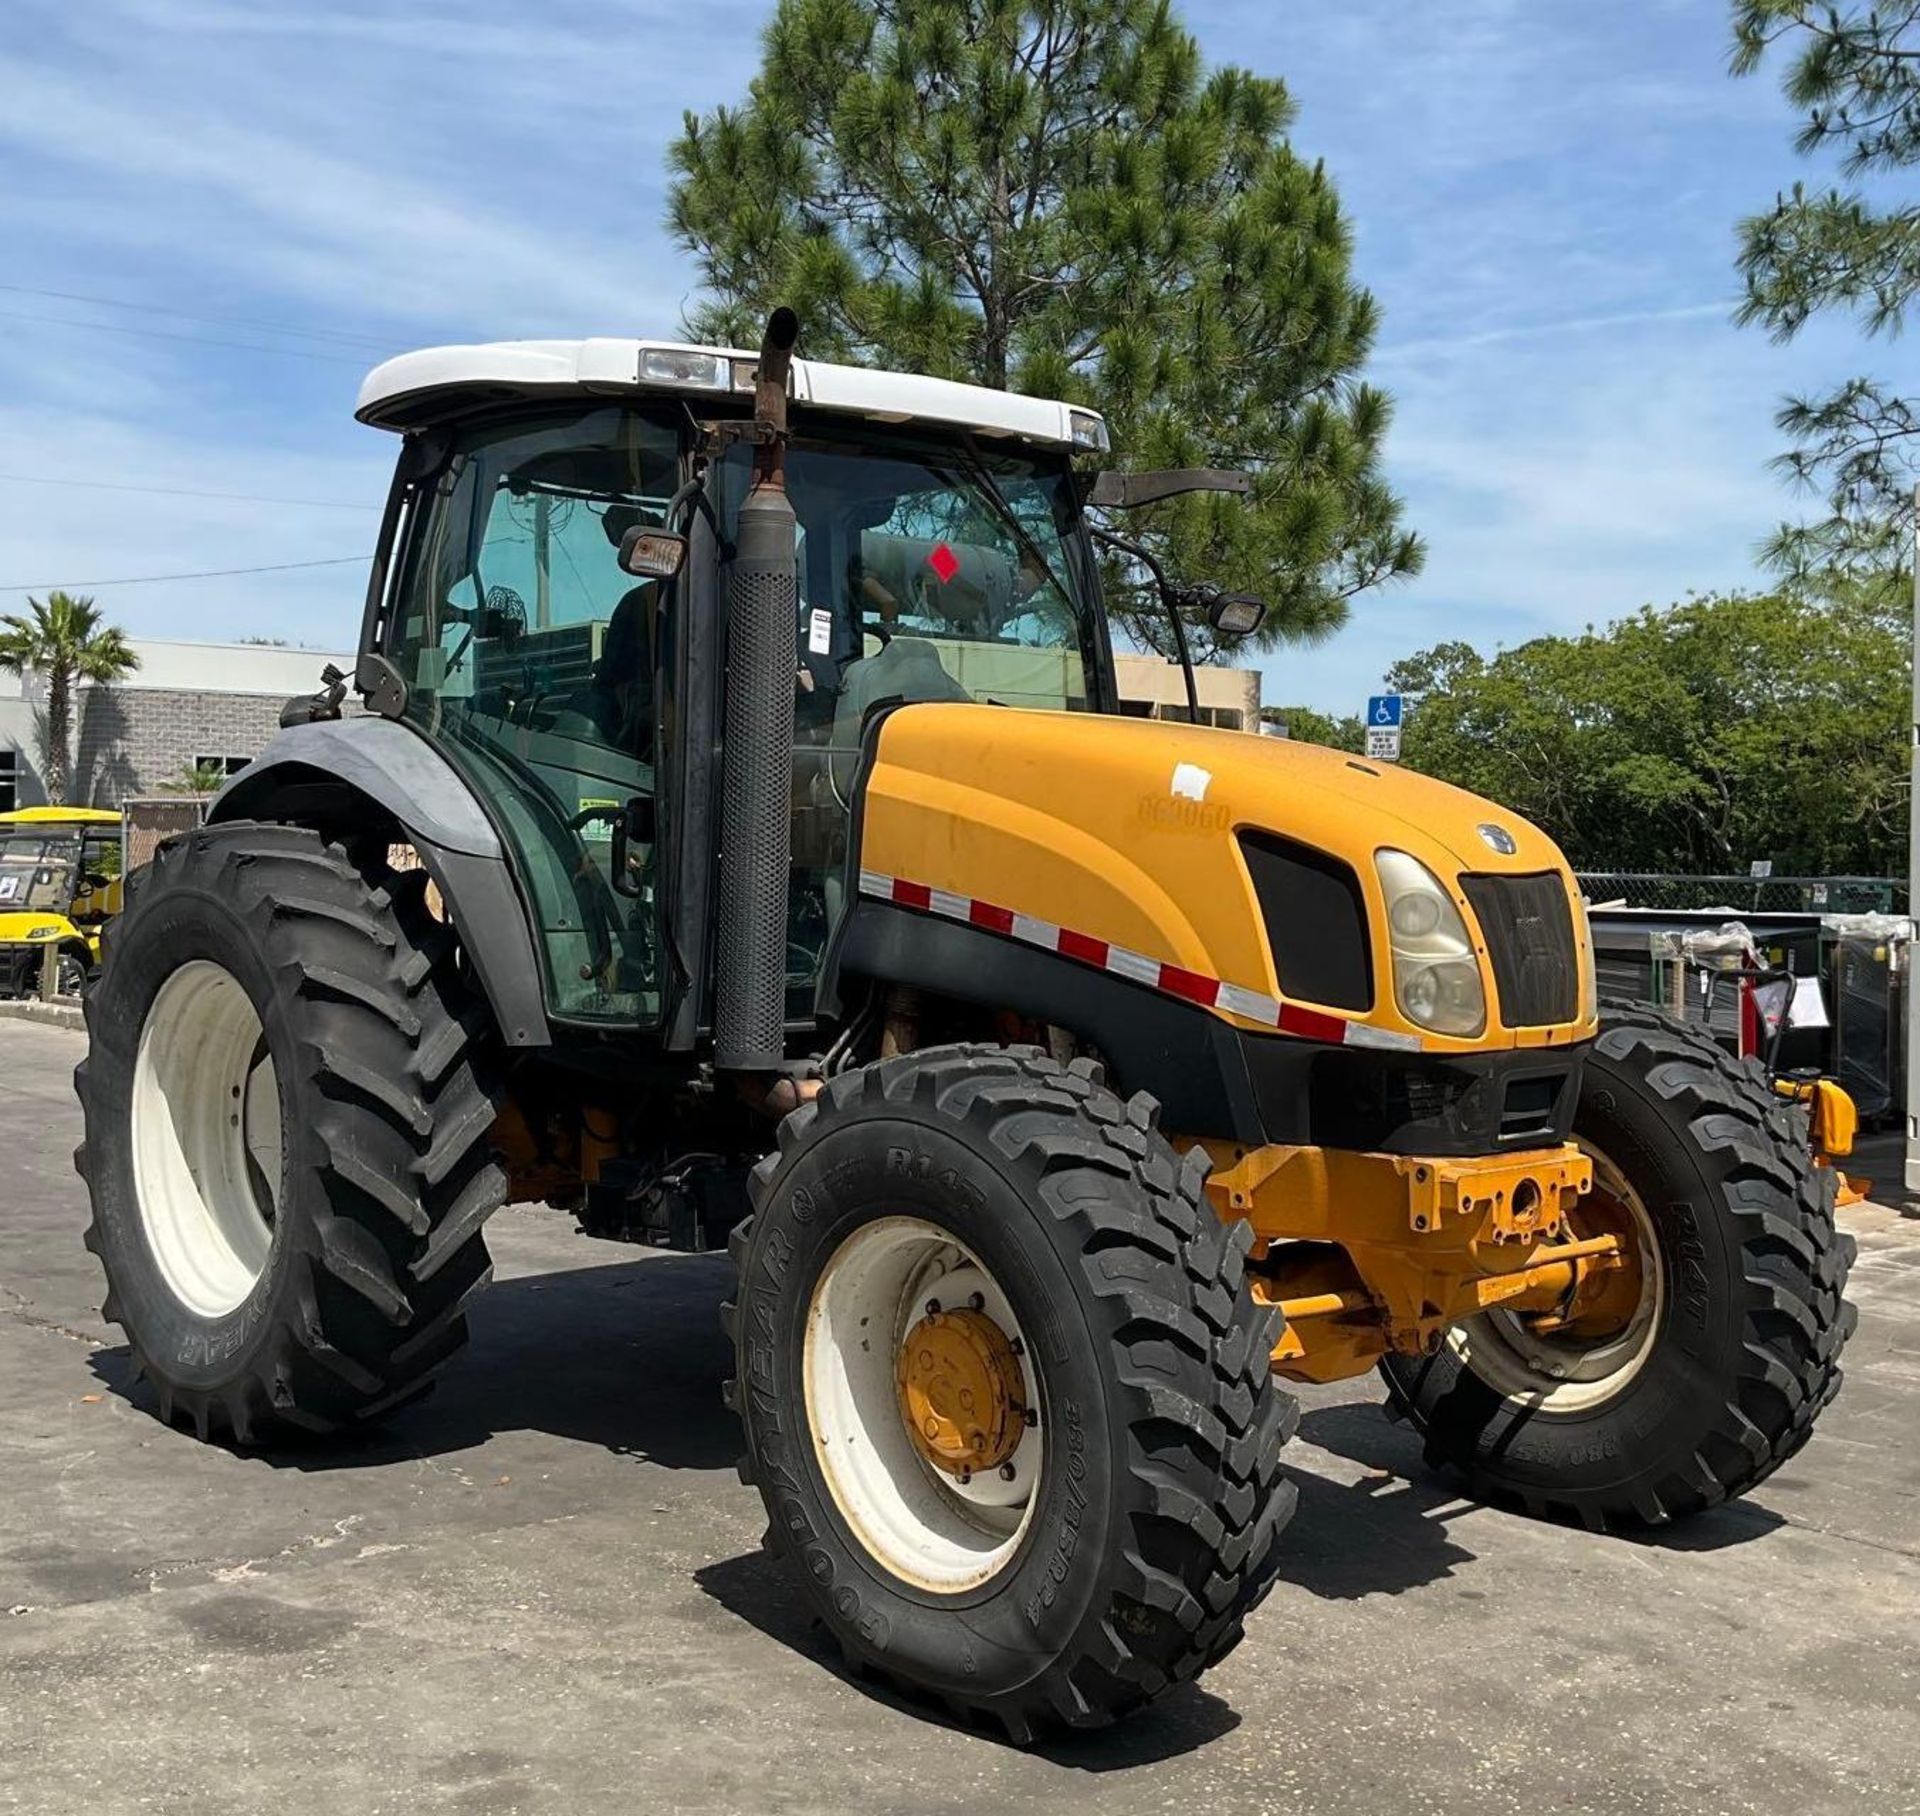 NEW HOLLAND TS135A TRACTOR, DIESEL, ENCLOSED CAB, 4WD , COLD AC, RUNS & OPERATES